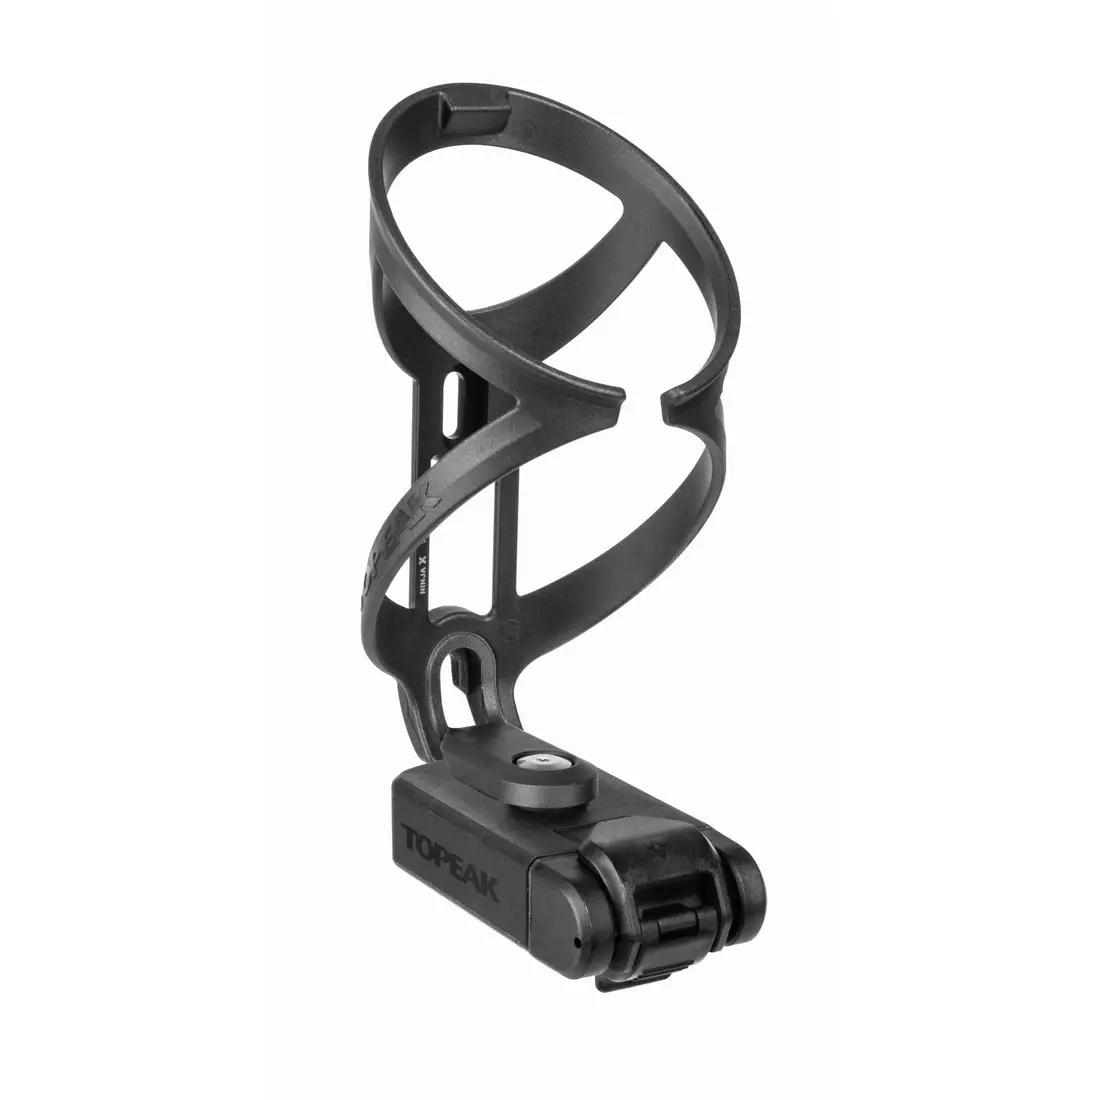 TOPEAK bottle cage compatible with accessories NINJA MASTRER+ CAGE X black T-TNJC-X